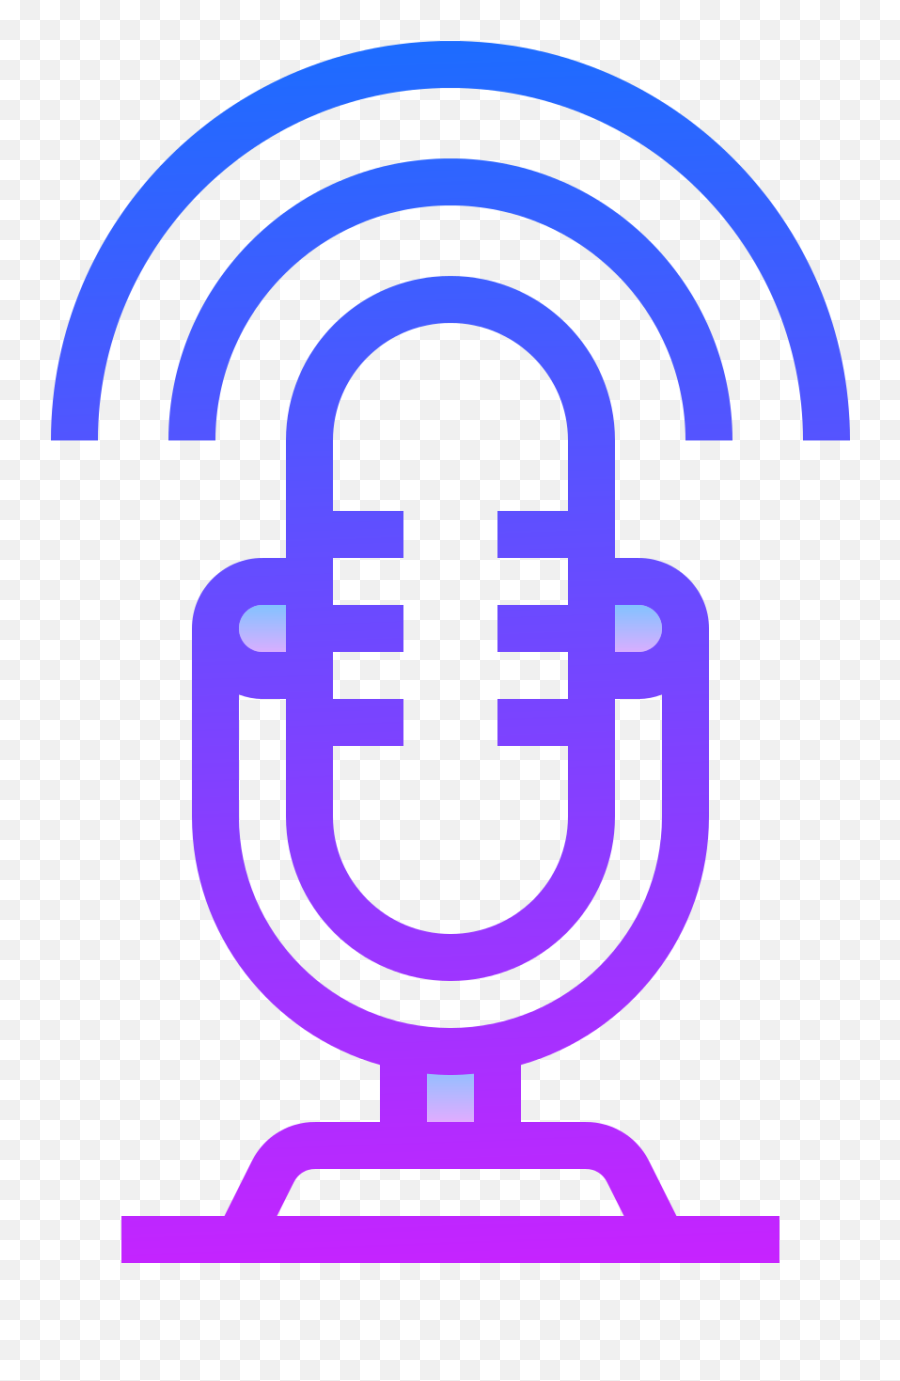 Download Microphone Icon Png Image With Emoji,Microphone Icon Png